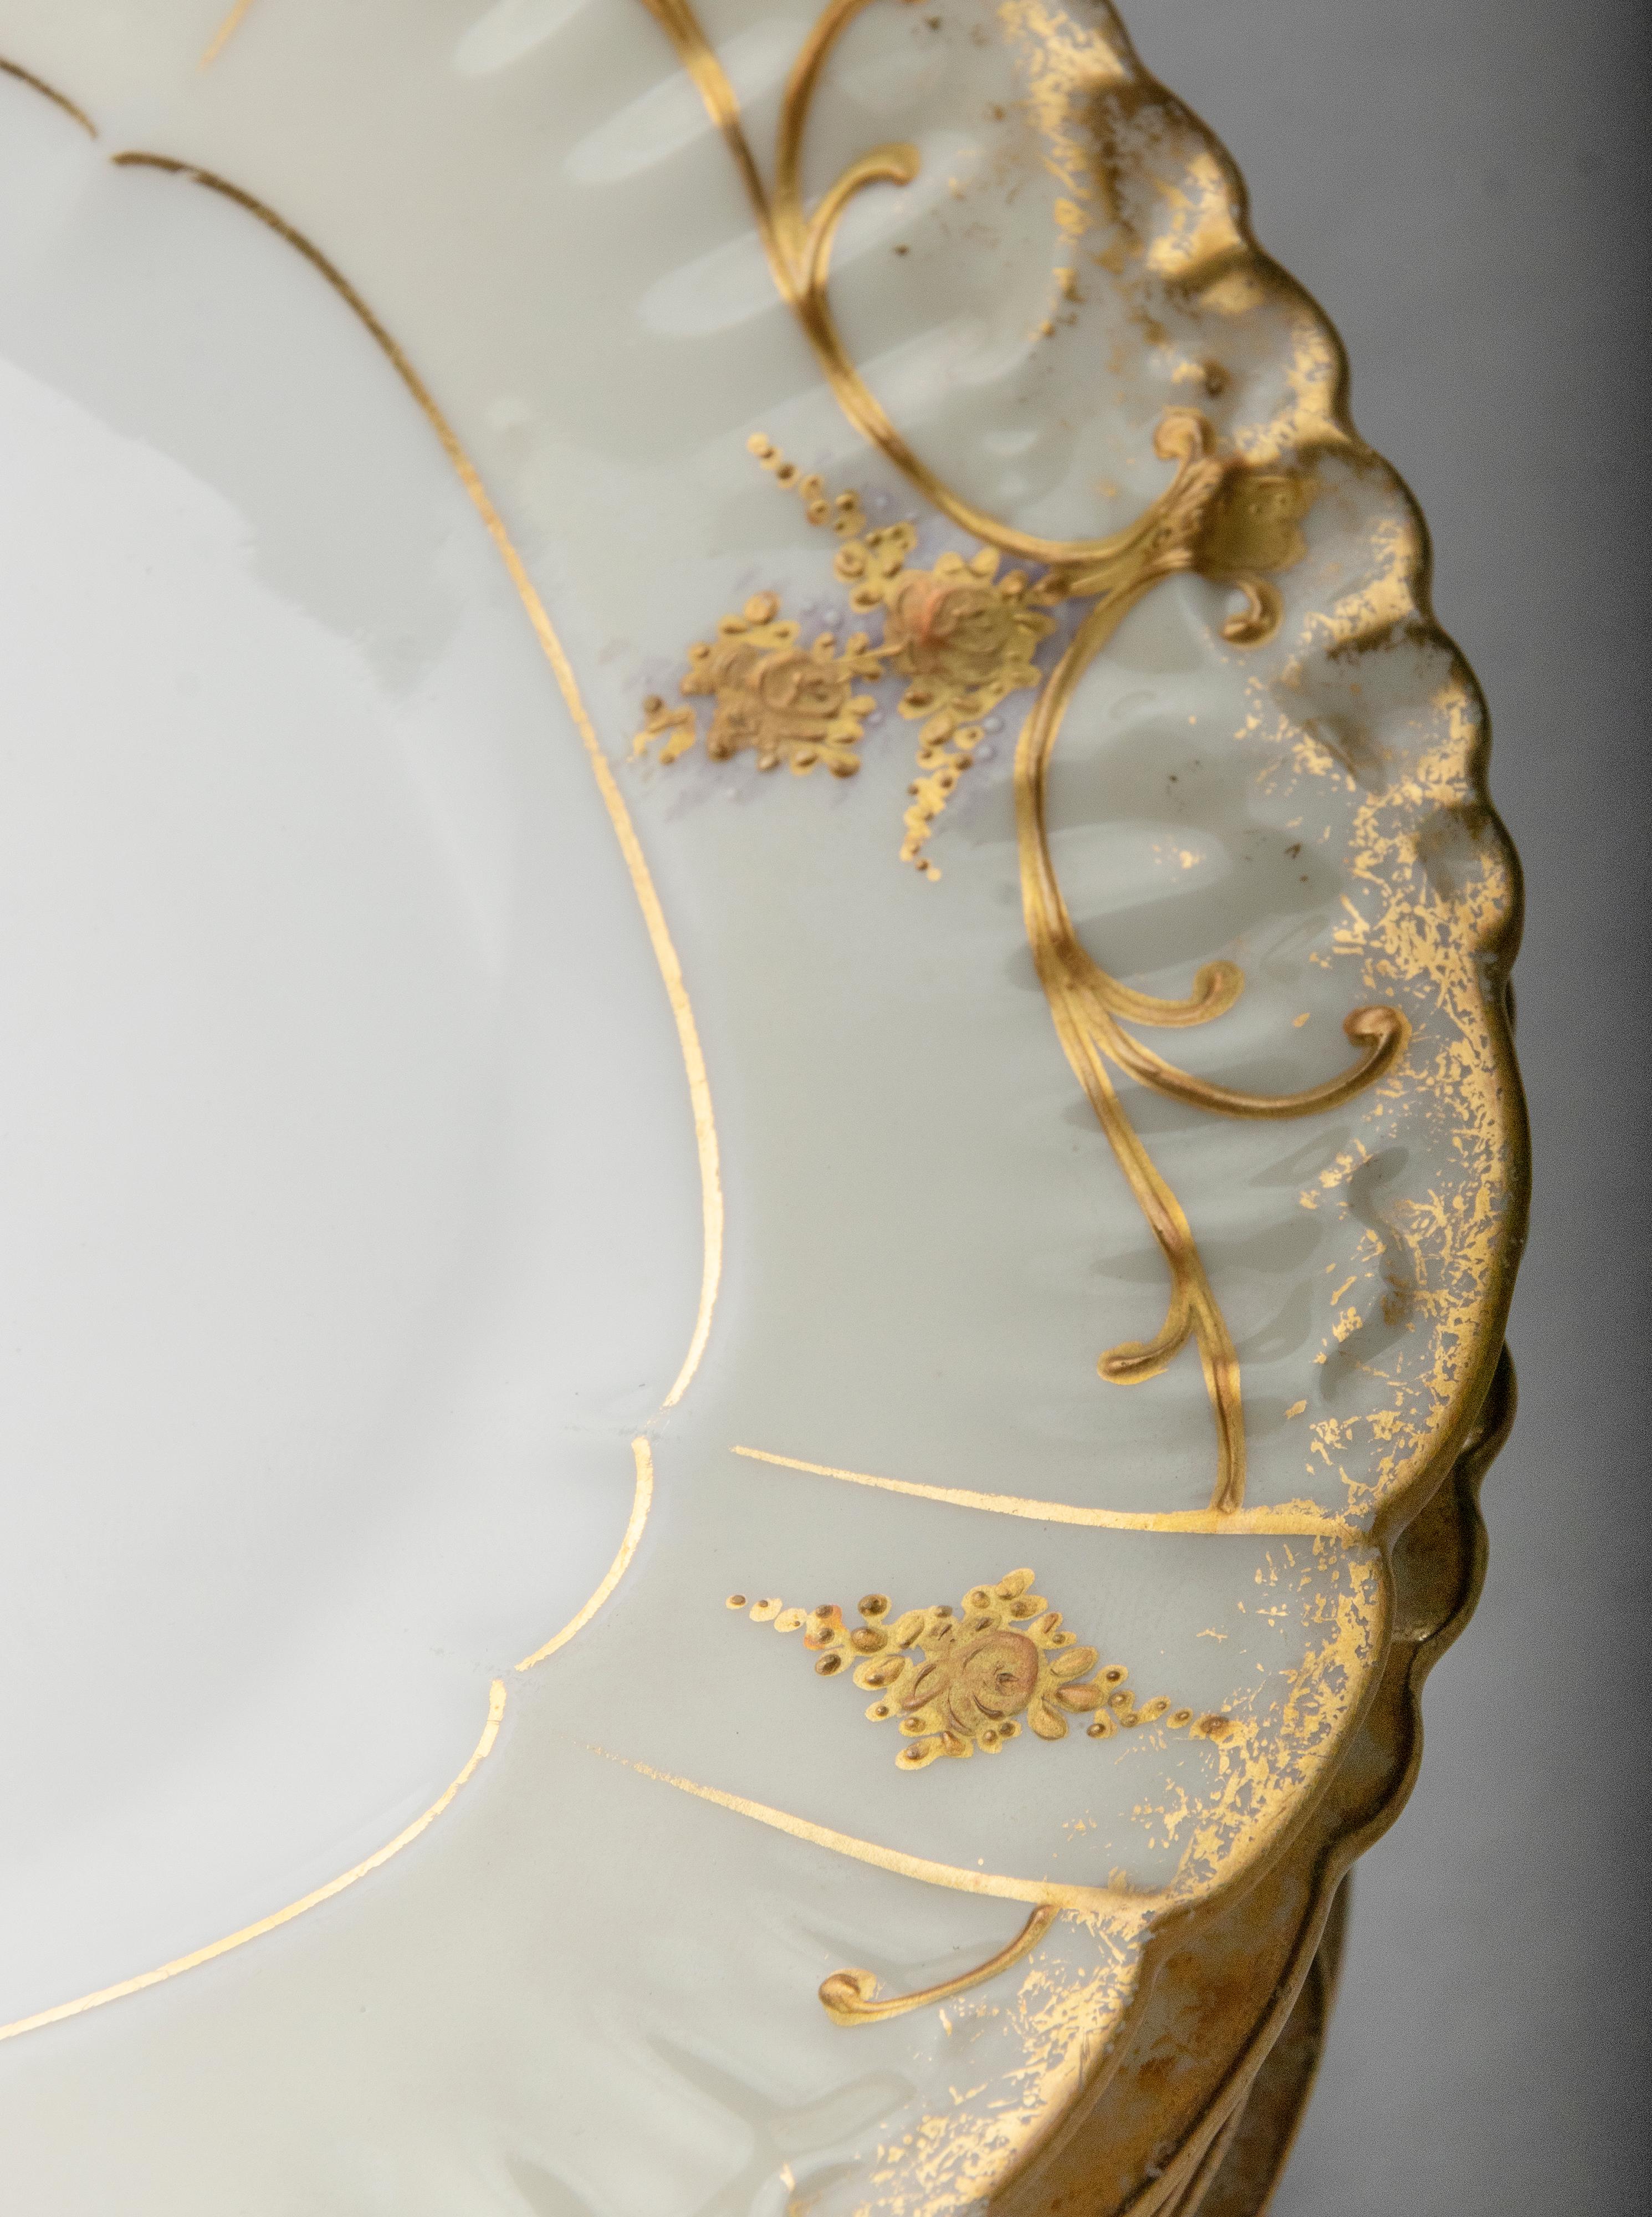 Set of 11 Early 20th Century Porcelain Dessert Plates Gilded by Limoges 4